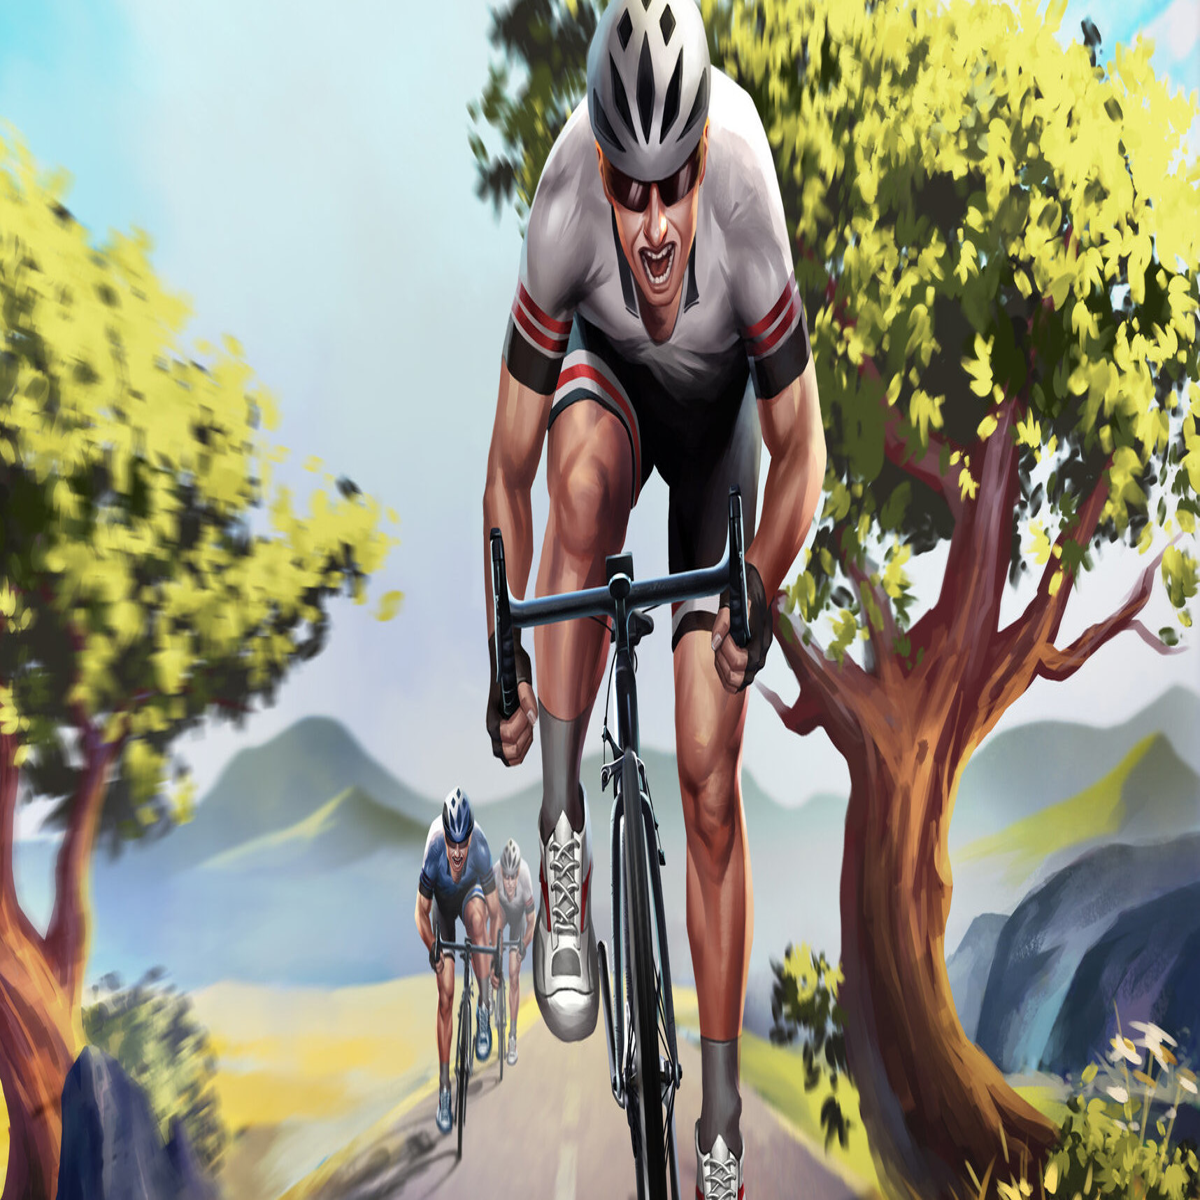 Learning bike pr0 stratz from cycling management games